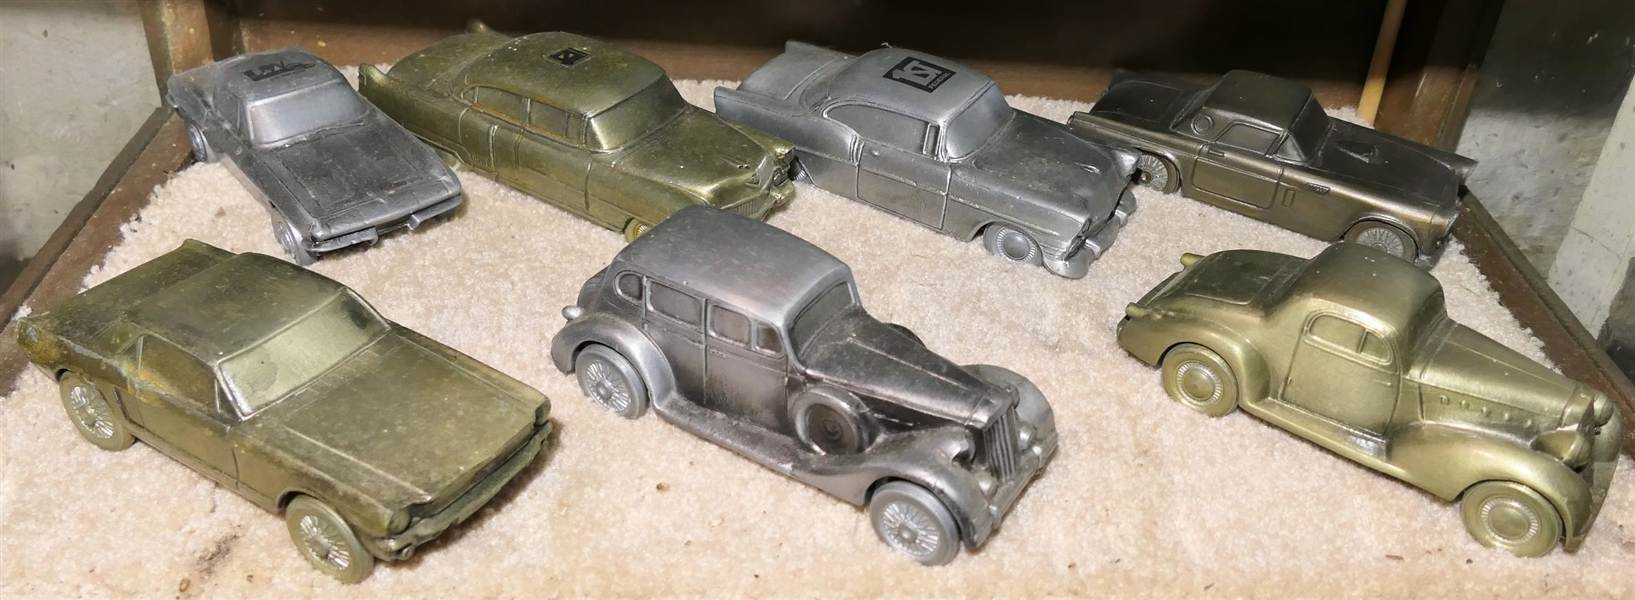 7 Metal Car Banks - Several Advertising - 1st Federal, Dale Way -Banks Made by Banthrico